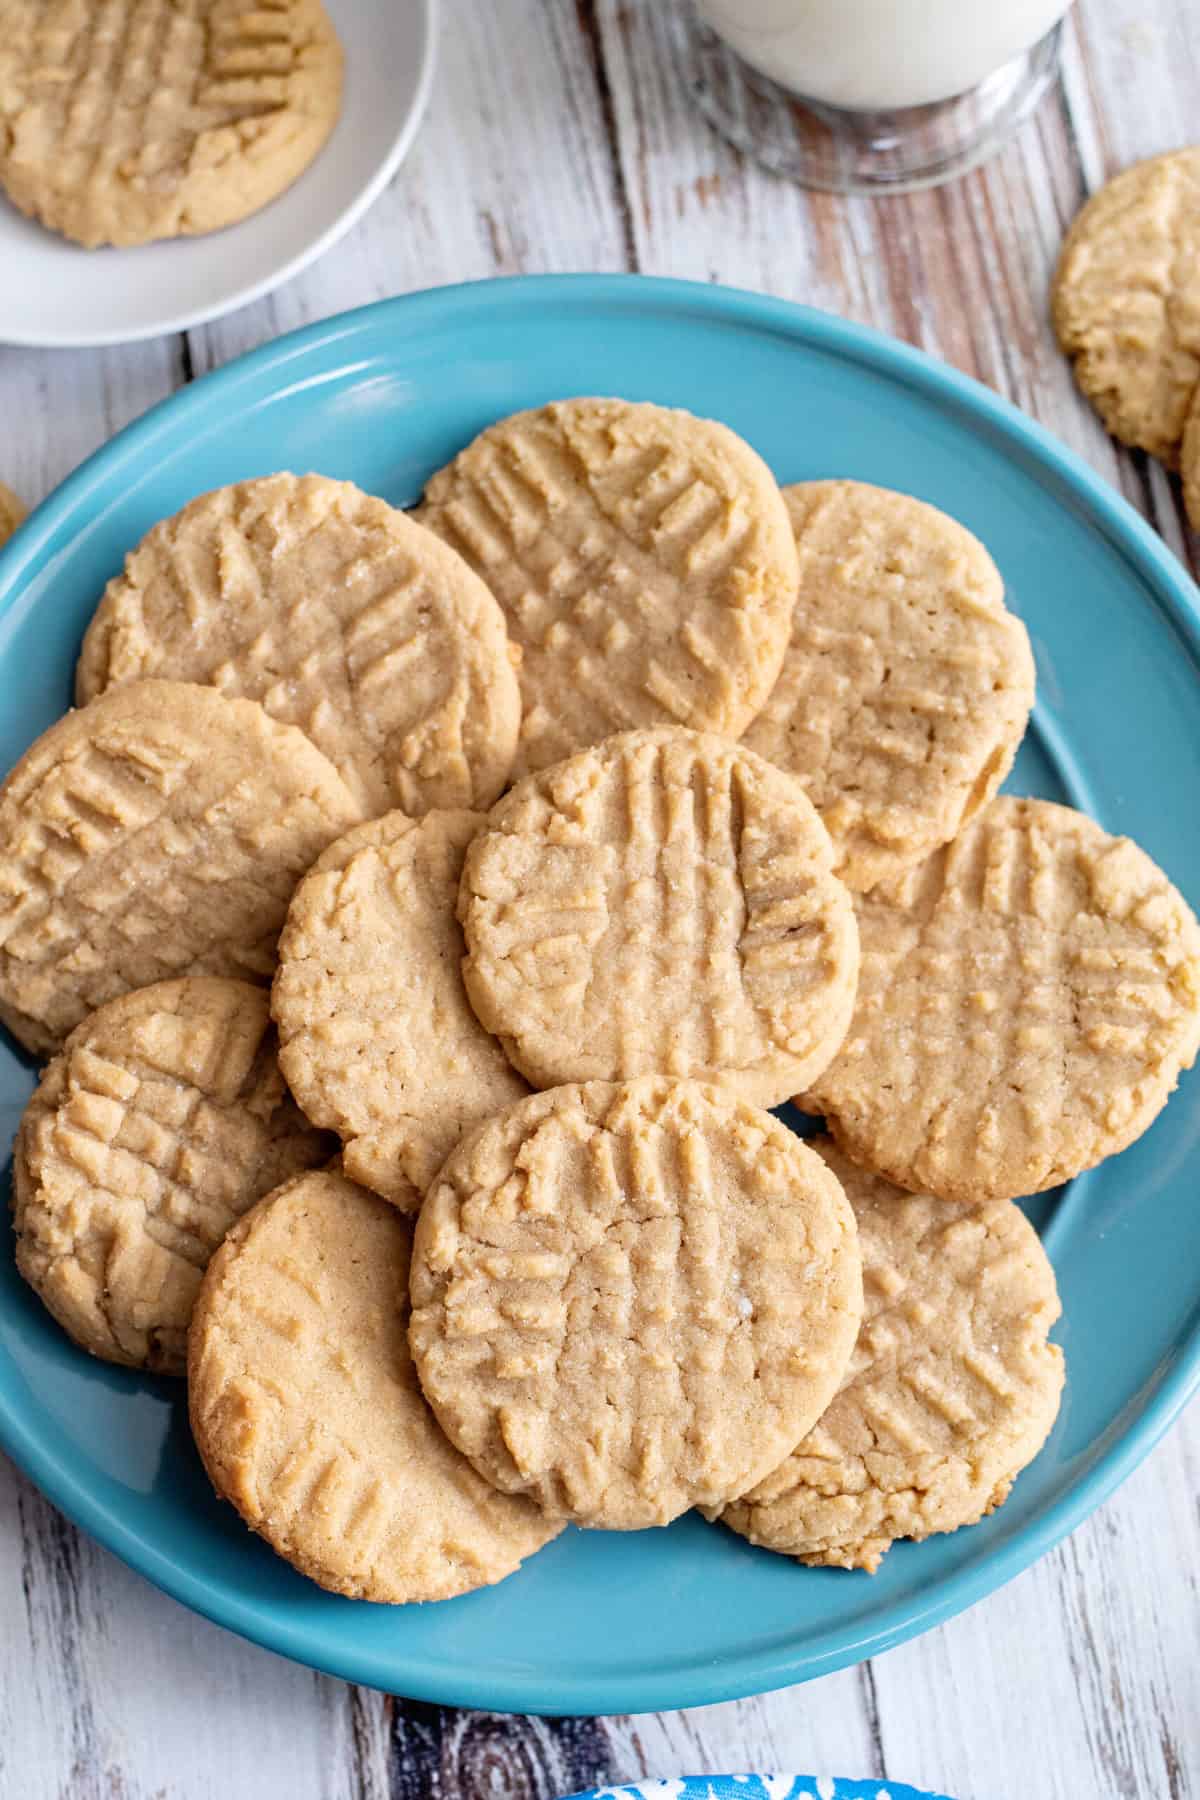 Plate of homemade peanut butter cookies.